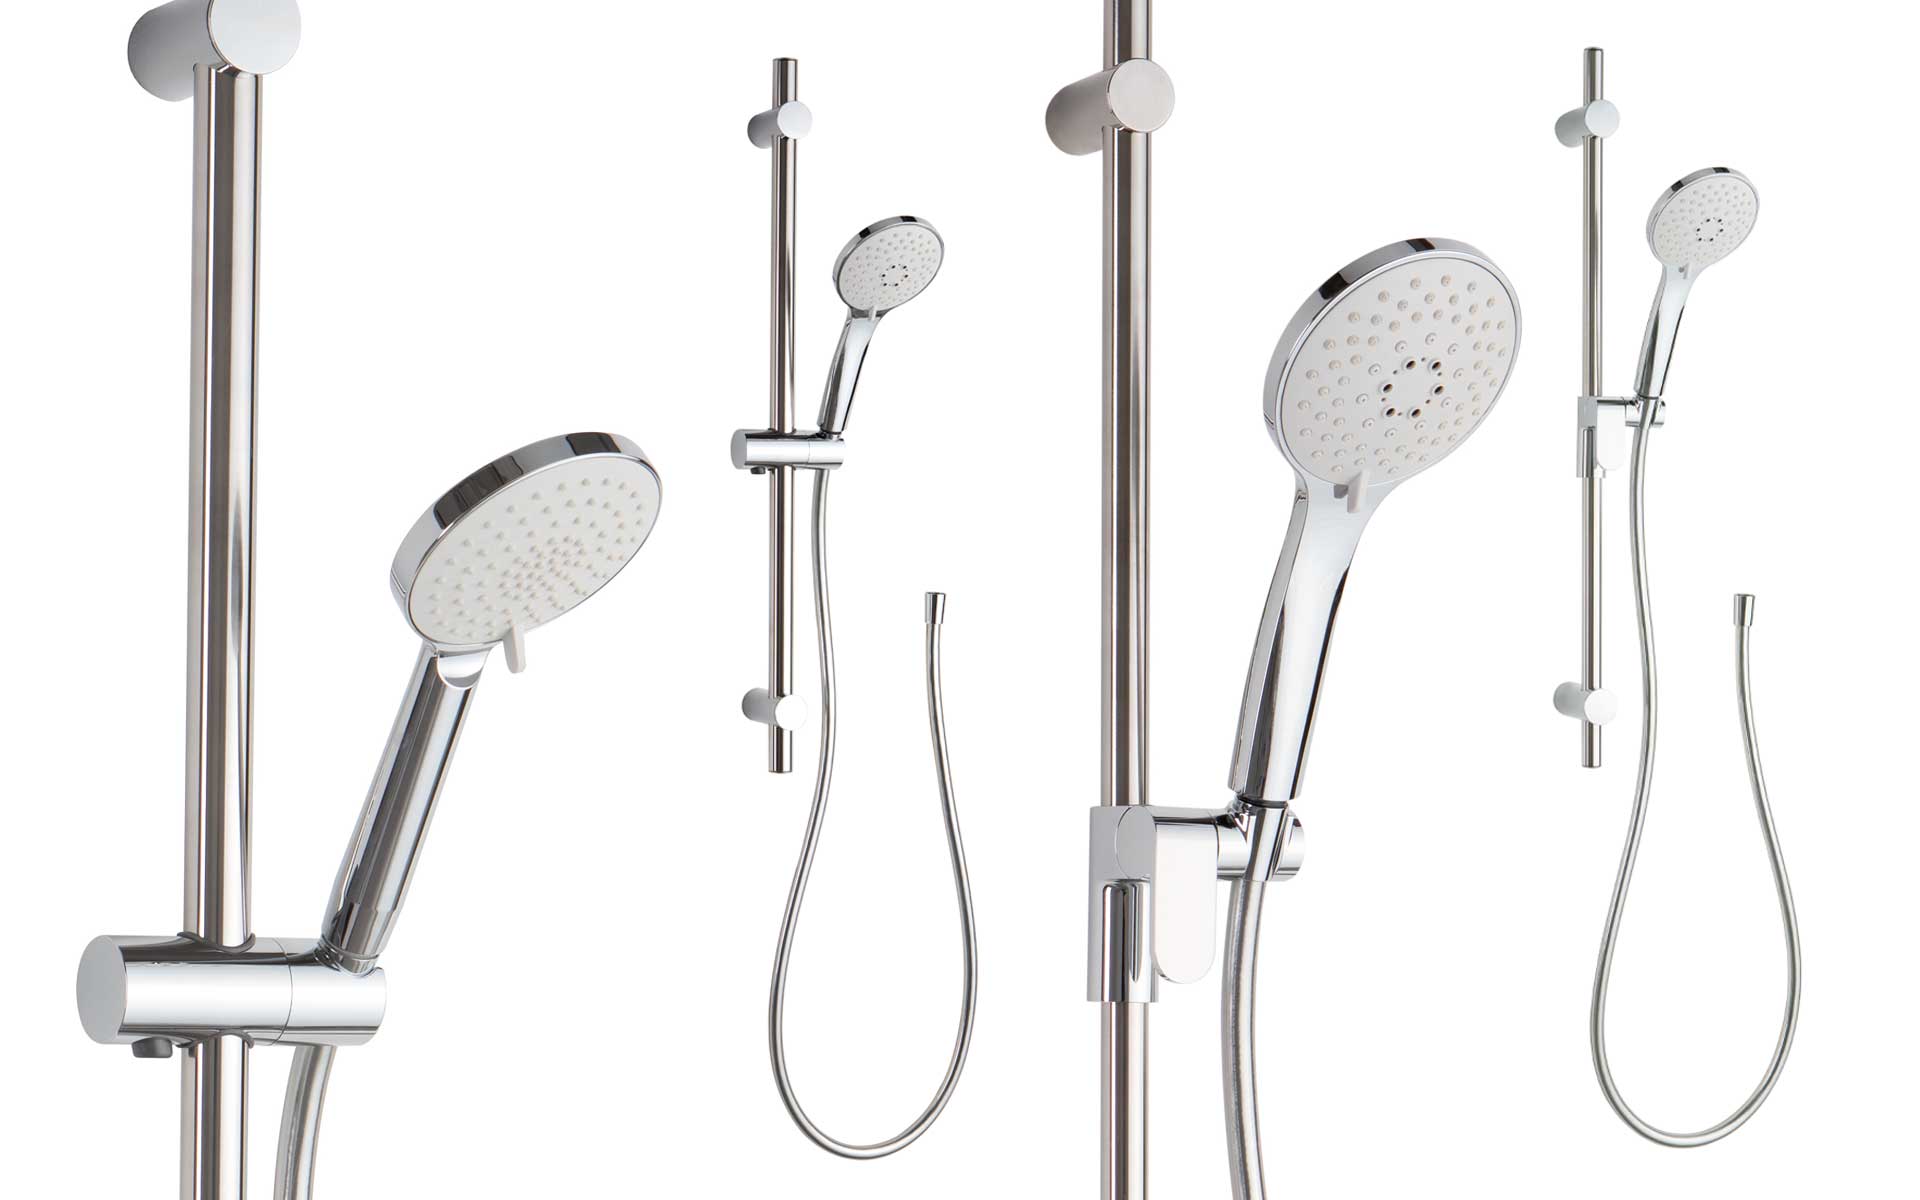 The SOLO shower set, made completely of stainless steel